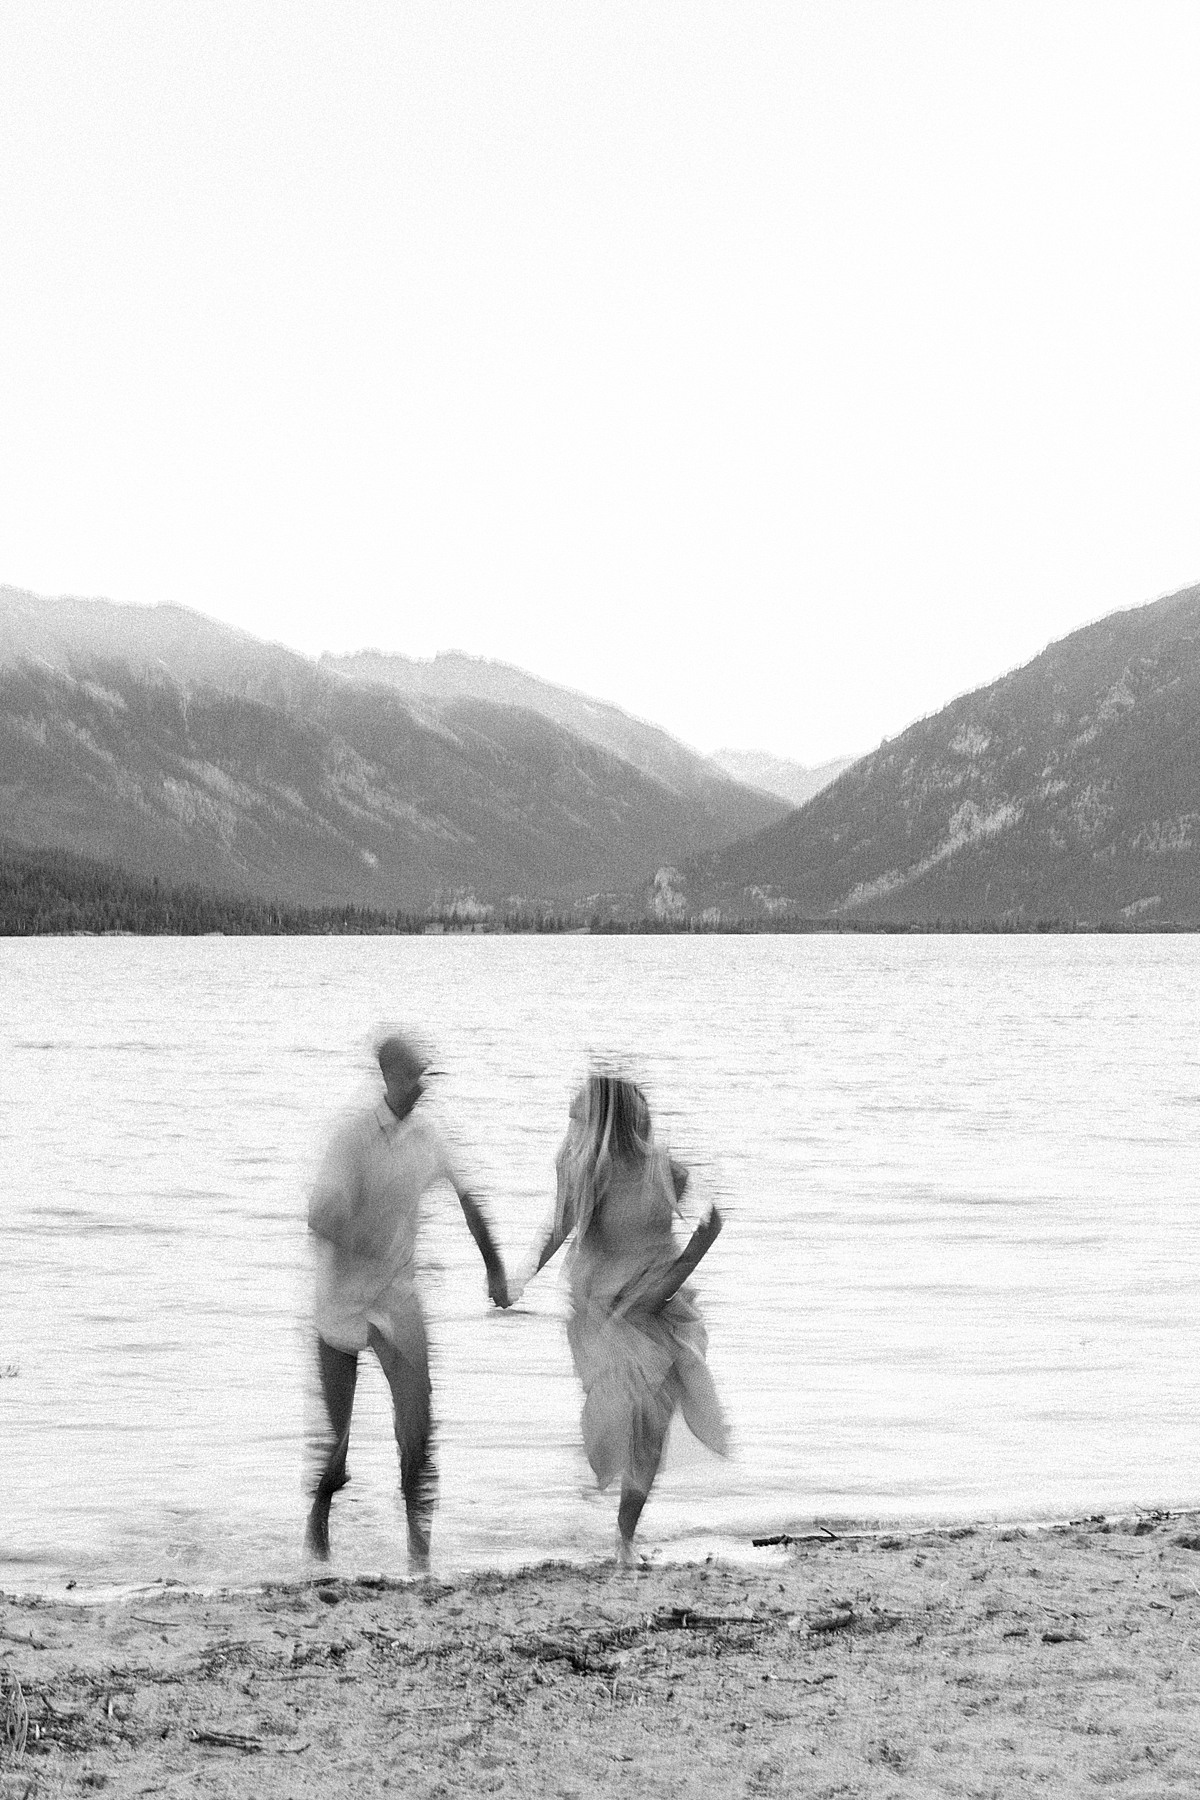 A blurry black and white photo of a guy and girl running out of a lake